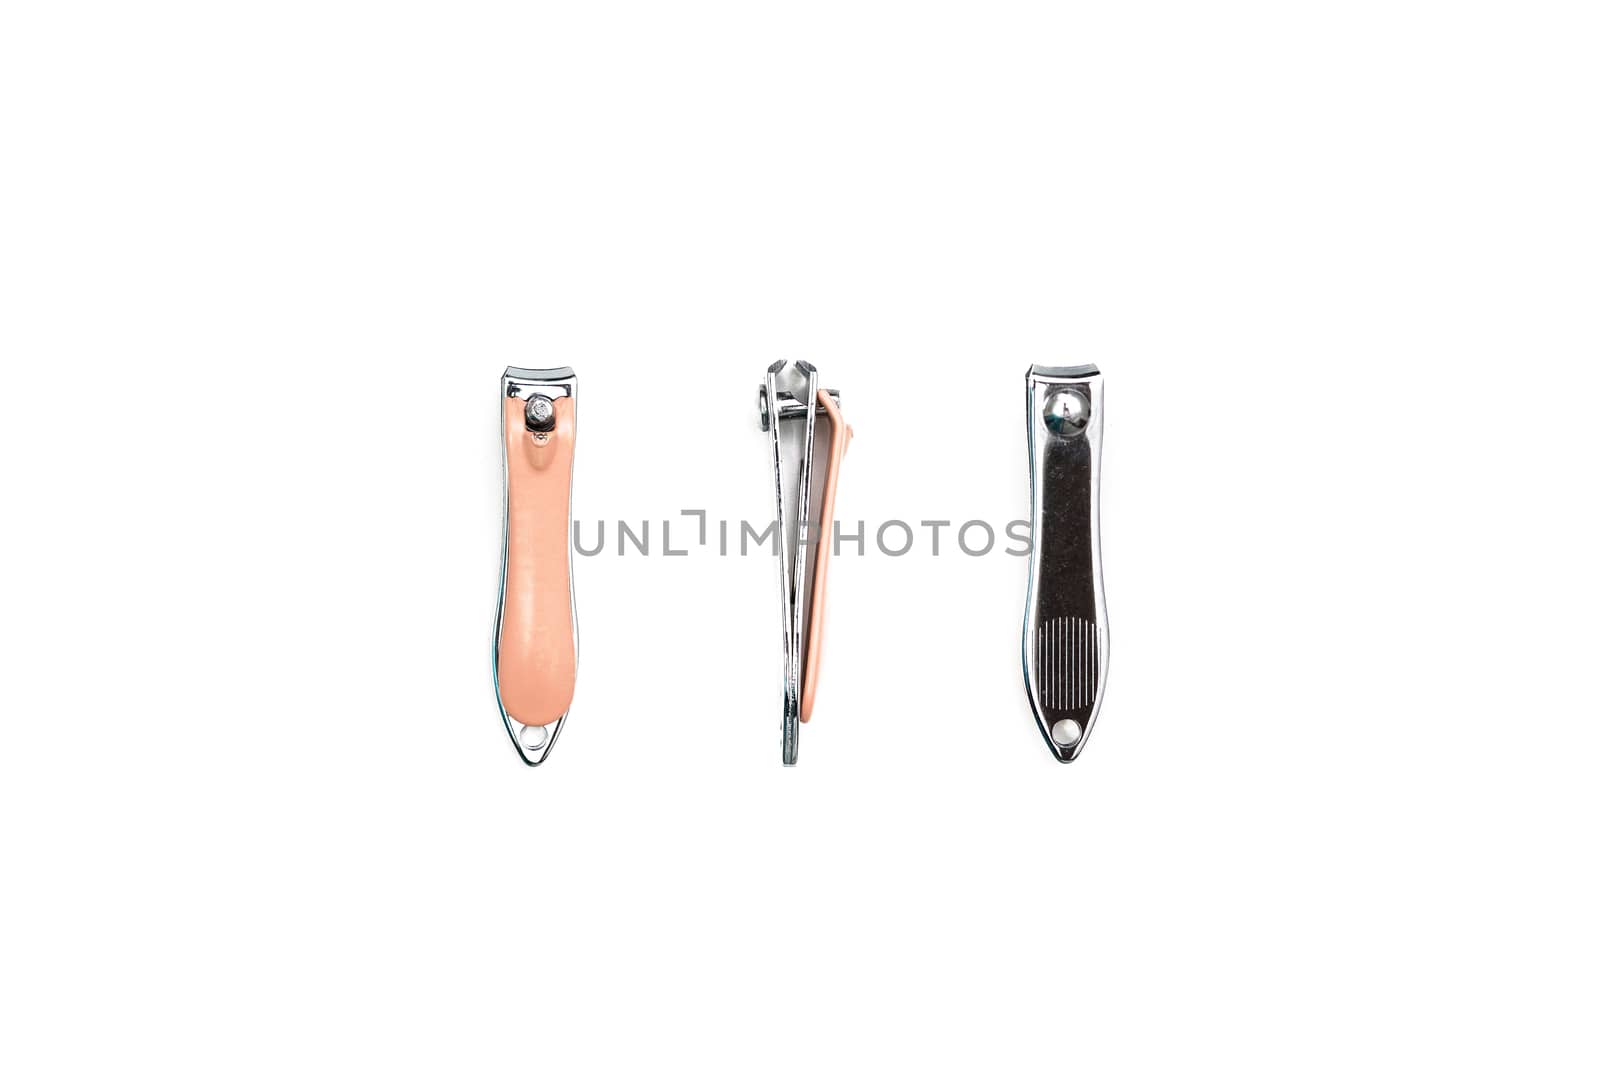 Manicure nail clippers made of metal. Isolated over white background.